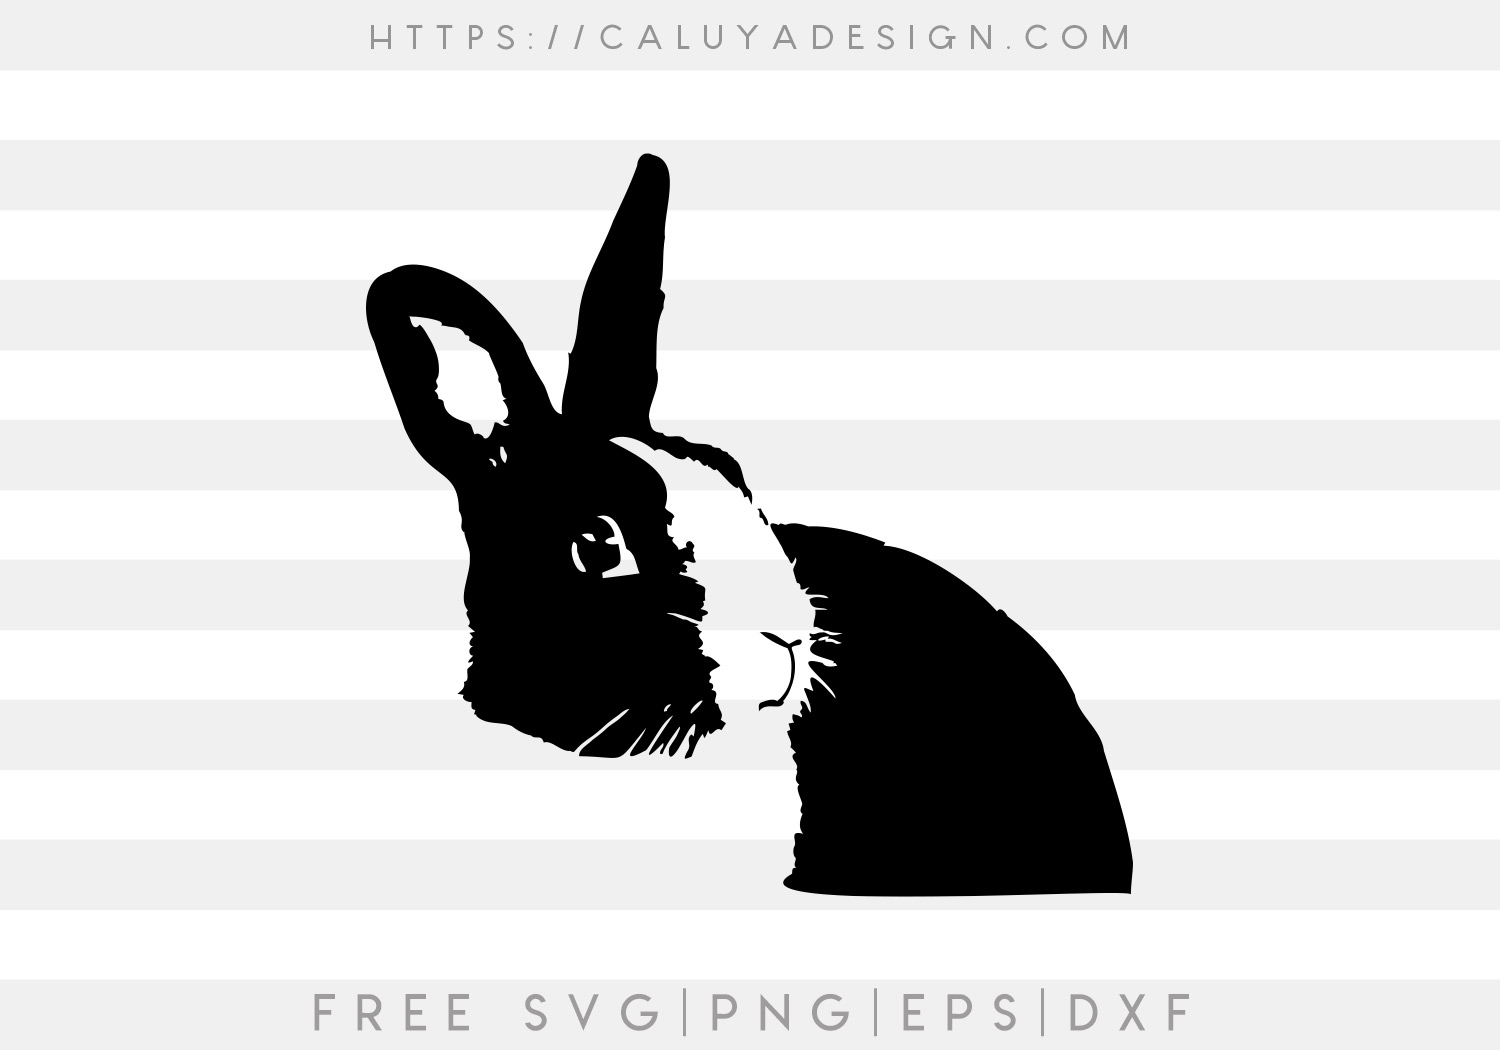 Download 20 Free Easter Themed Svg For Cricut Cameo Silhouette Users